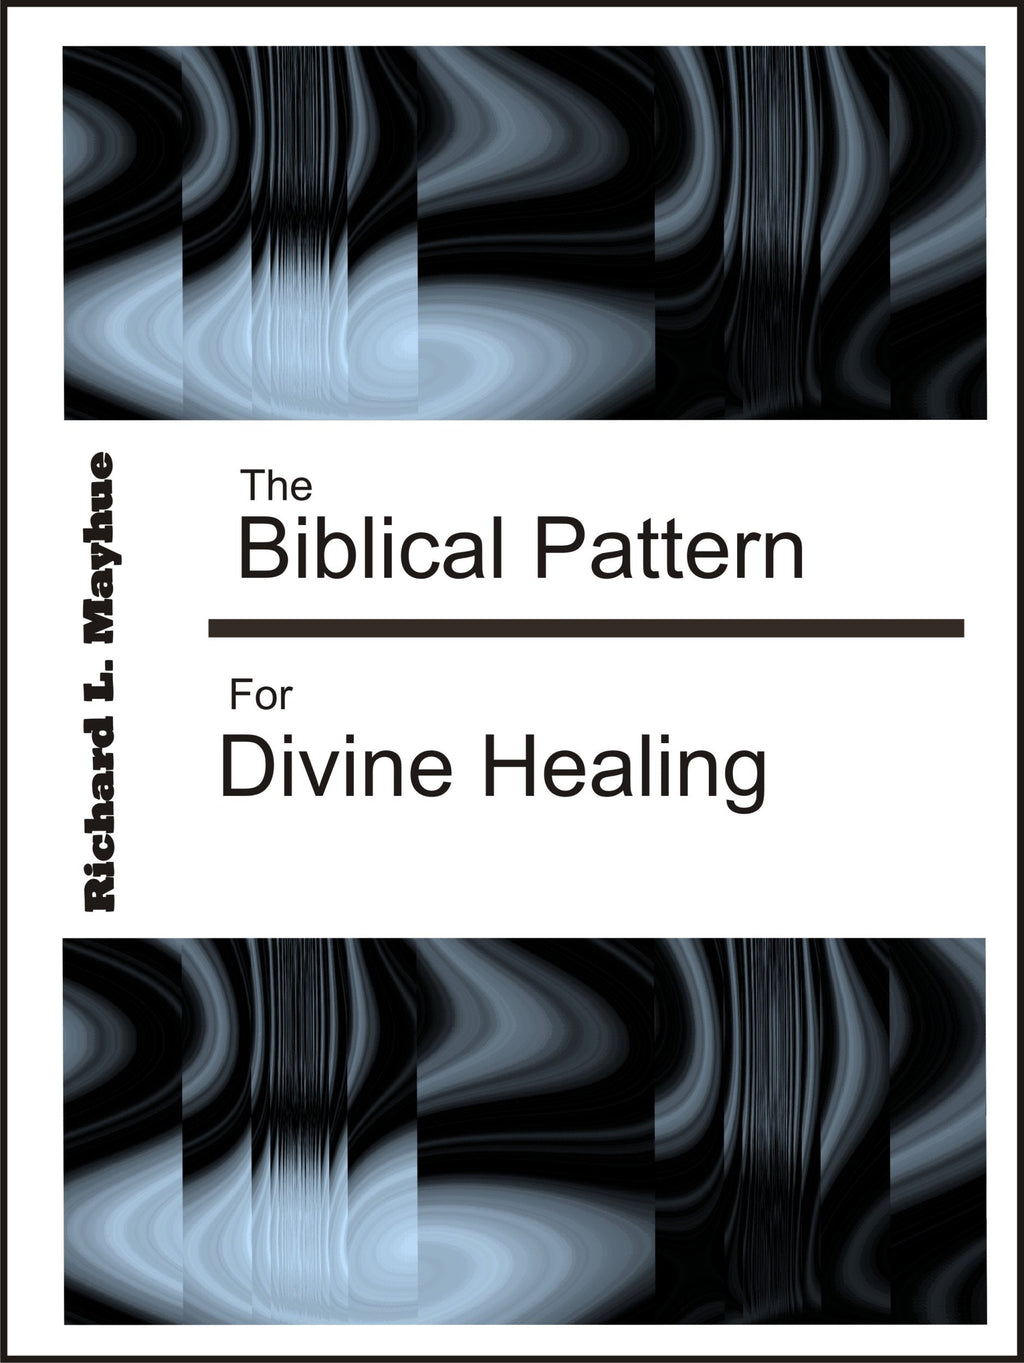 The Biblical Pattern for Divine Healing